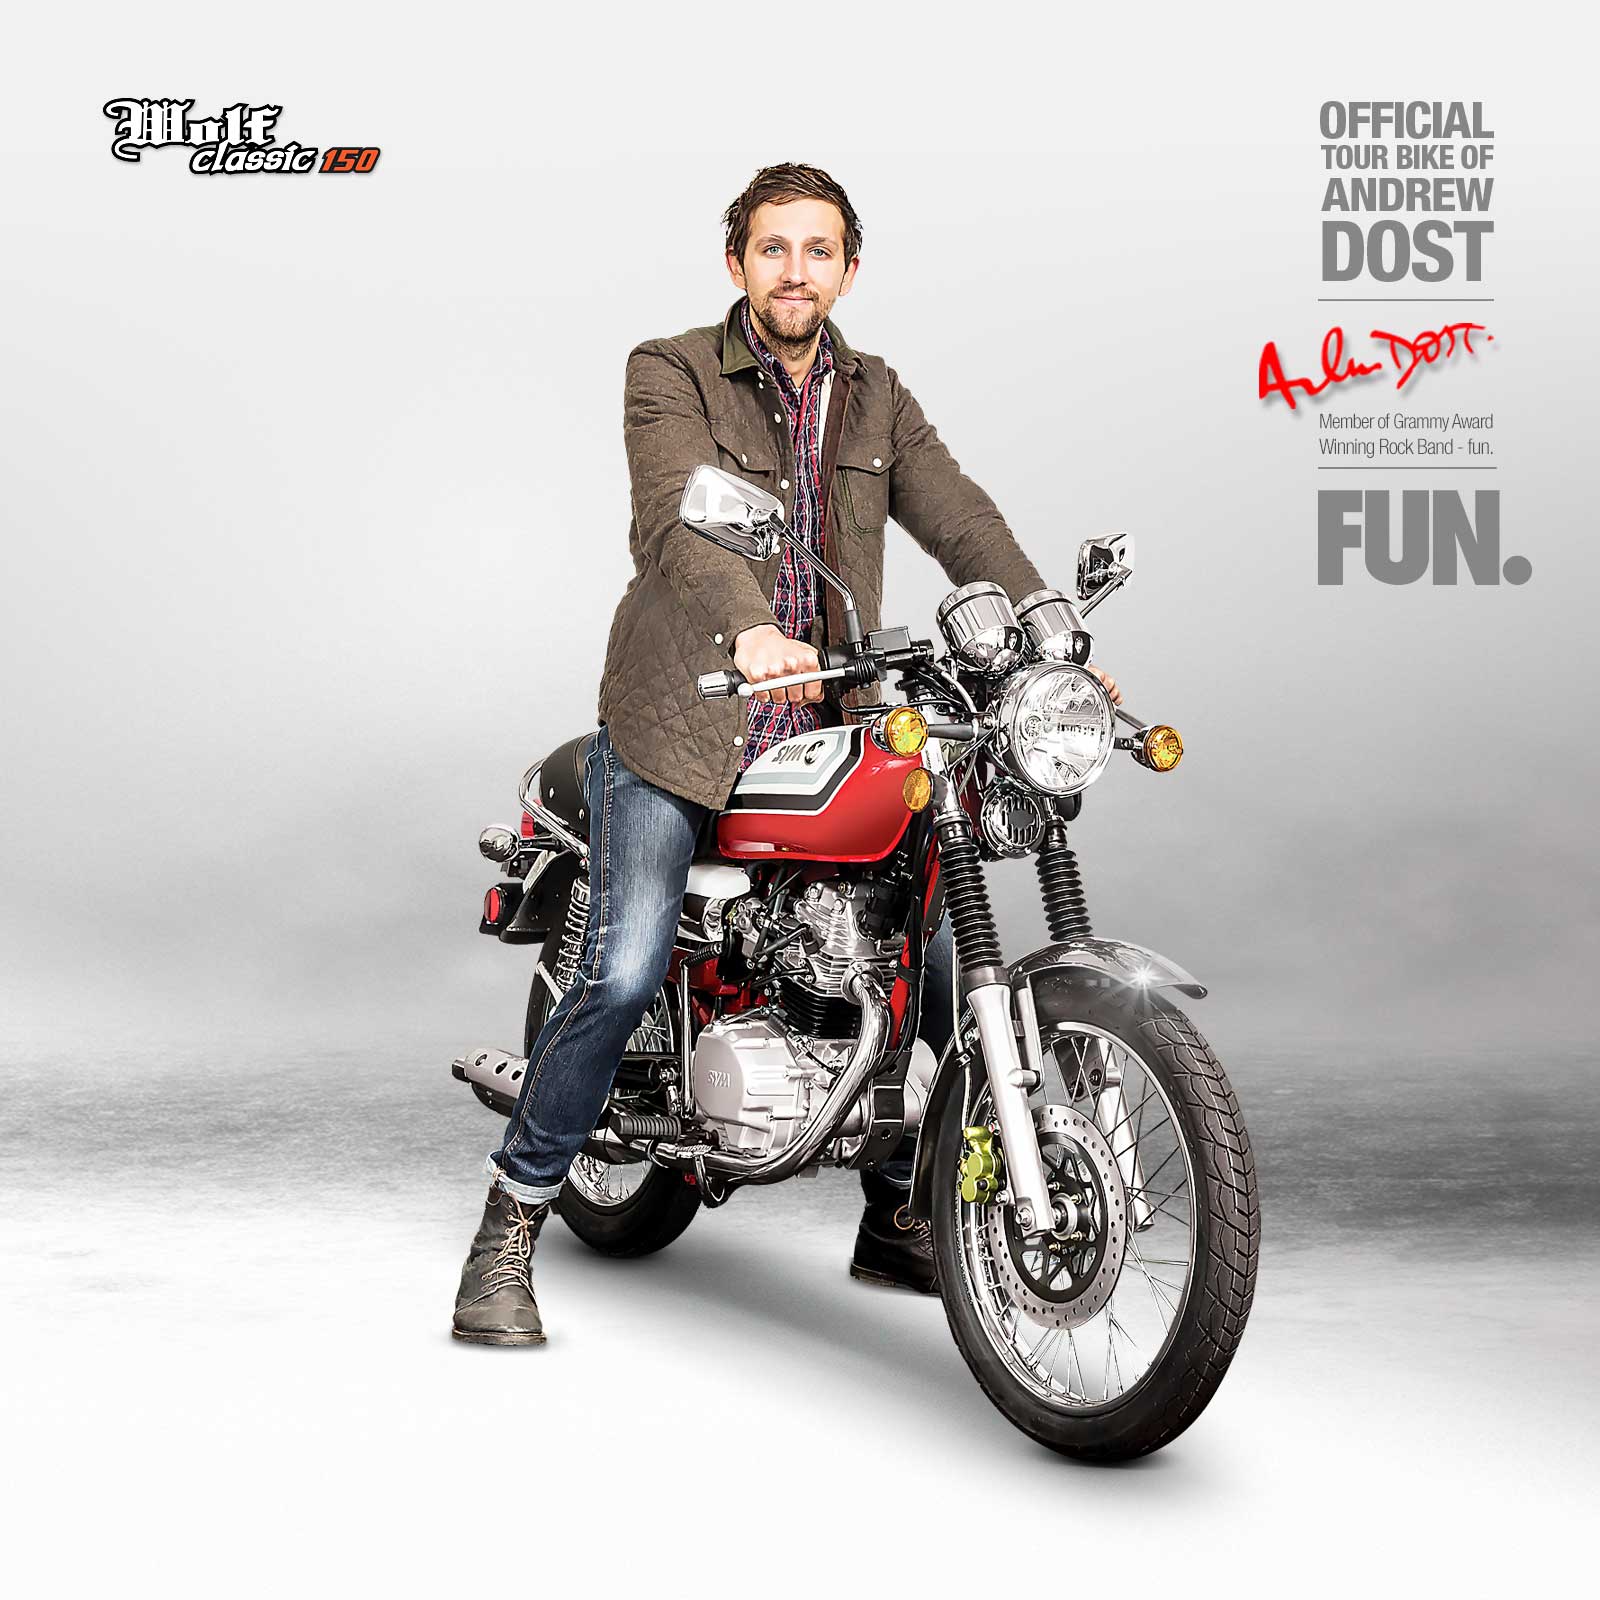 Wolf Classic 150 - The Official Tour Bike of Andrew Dost